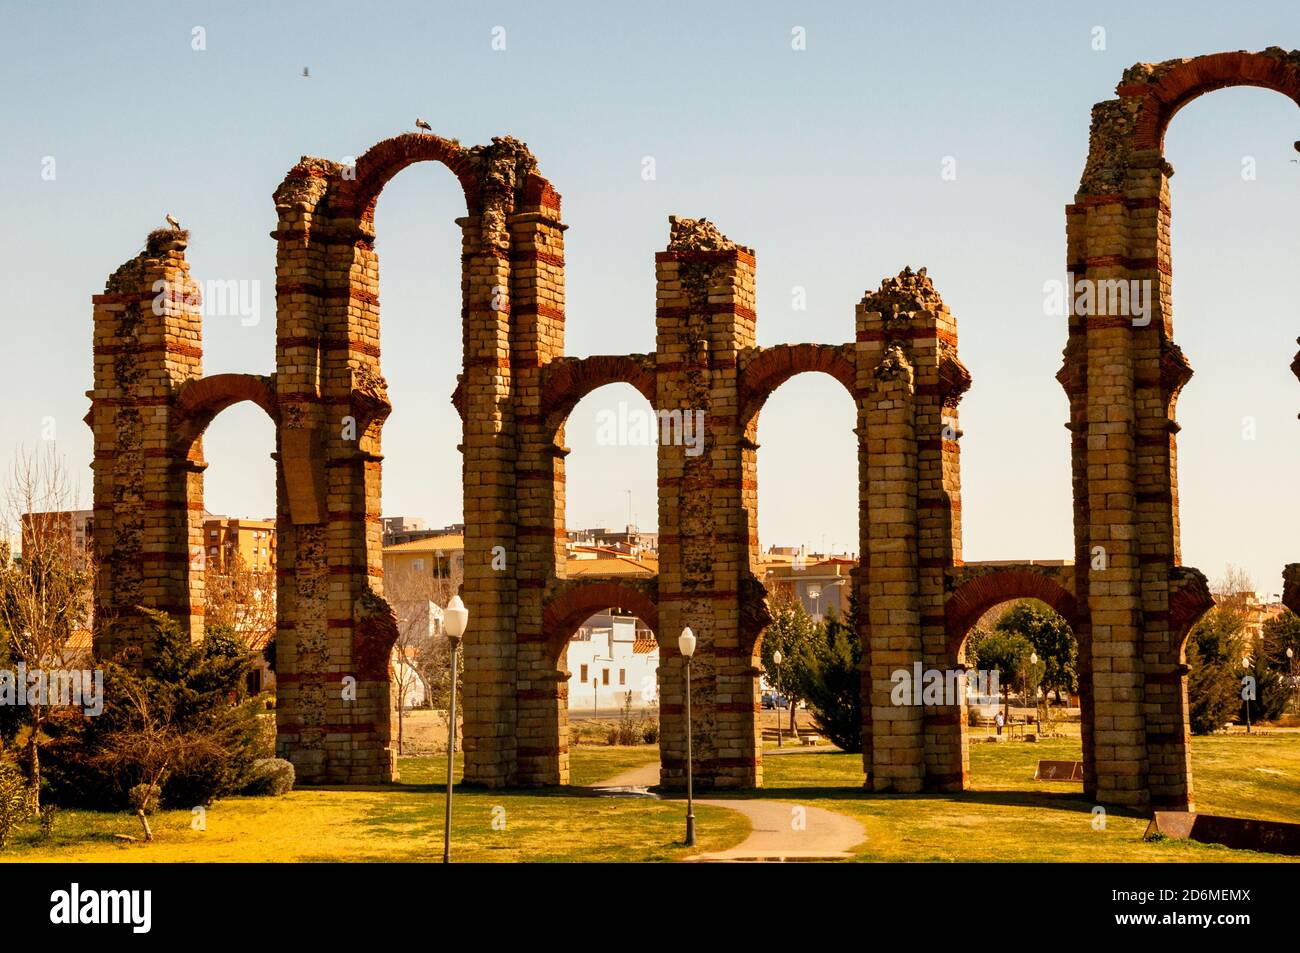 Residents of Mérida call the Los Milagros Aqueduct 'Miraculous Aqueduct' for the awe it inspires, Spain. Stock Photo